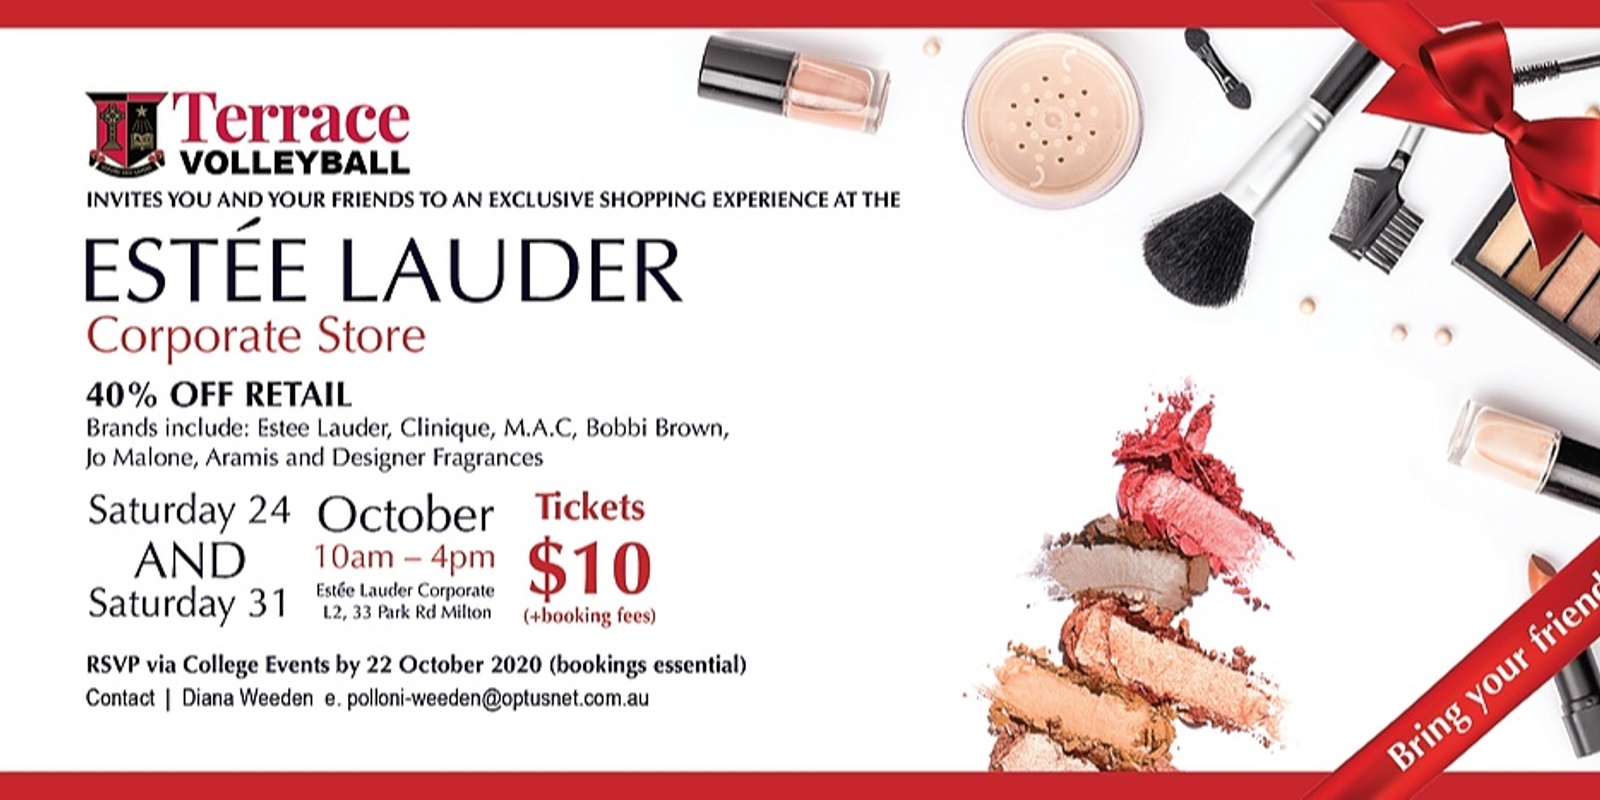 Banner image for Terrace Volleyball Estee Lauder Corporate Shopping Experience